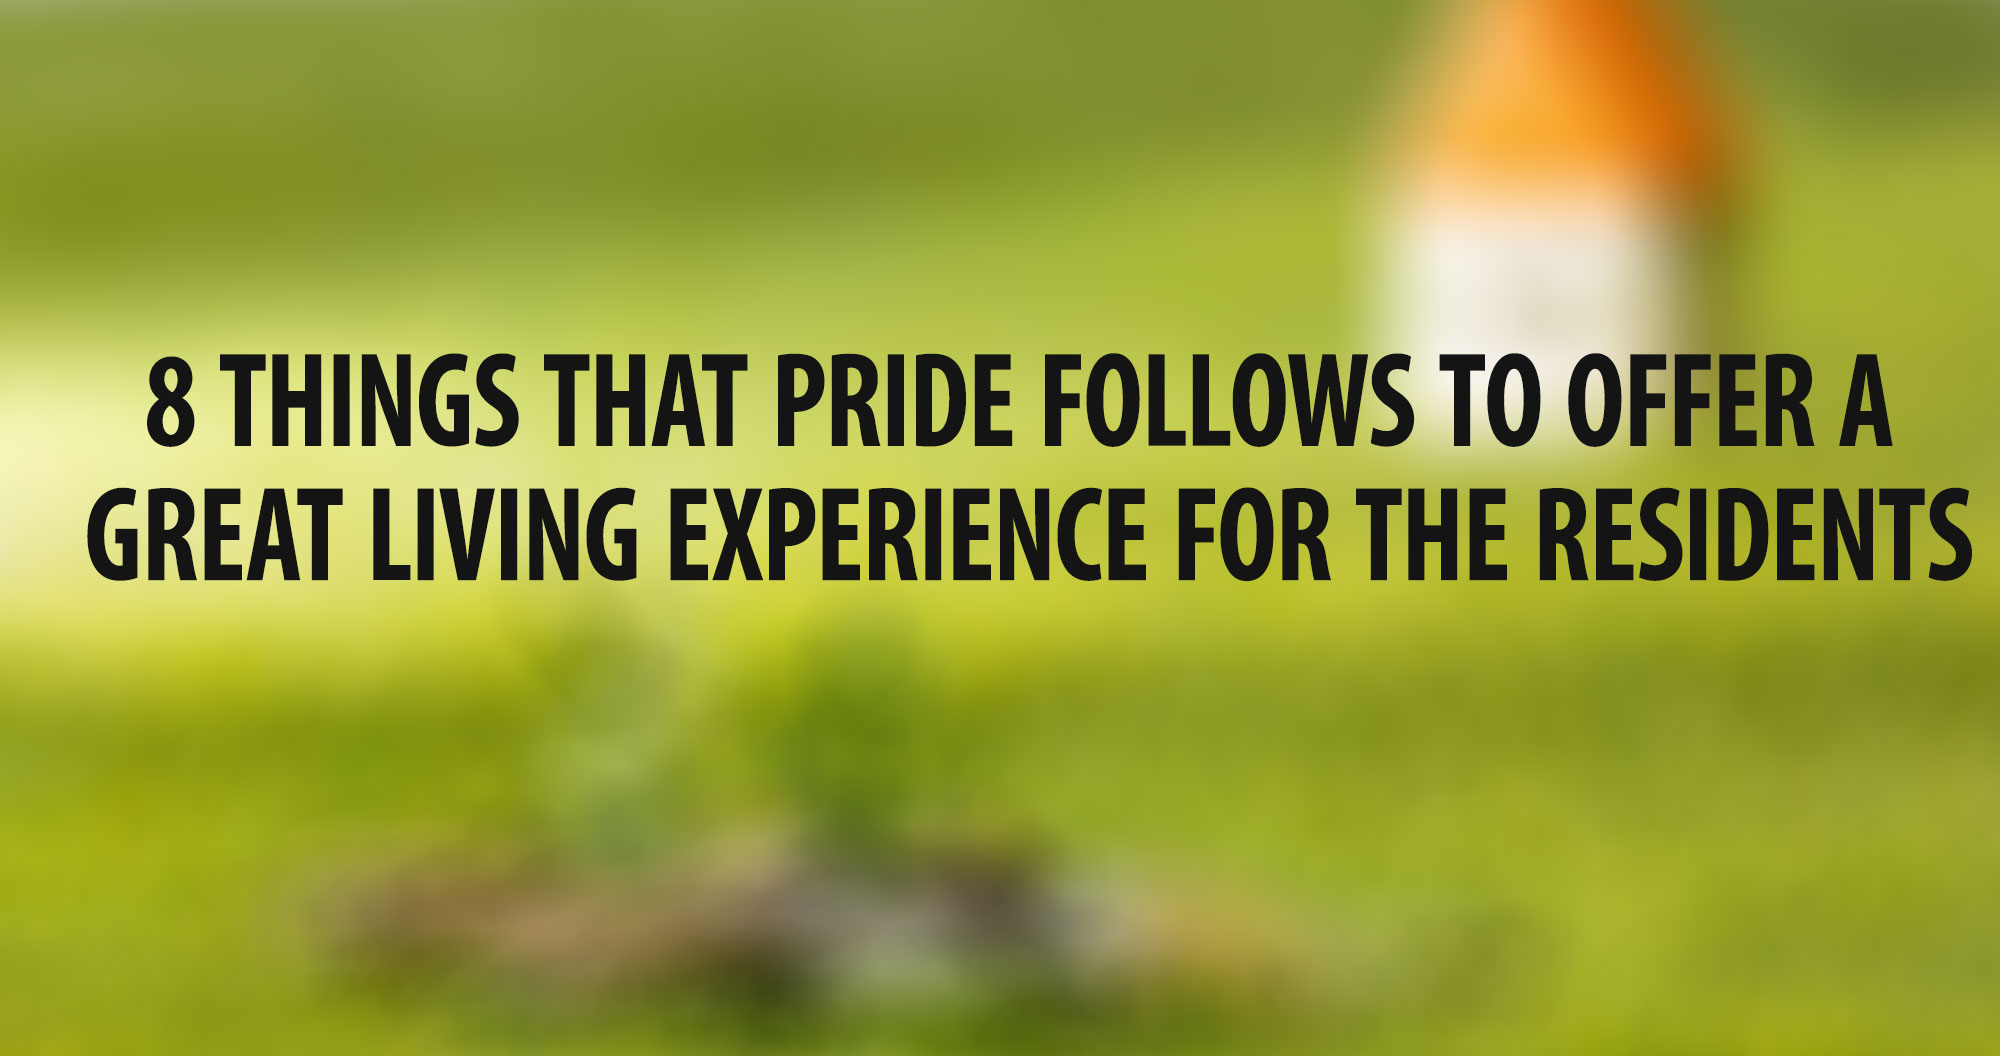 8 Things That Pride Follows to Offer a Great Living Experience for the Residents